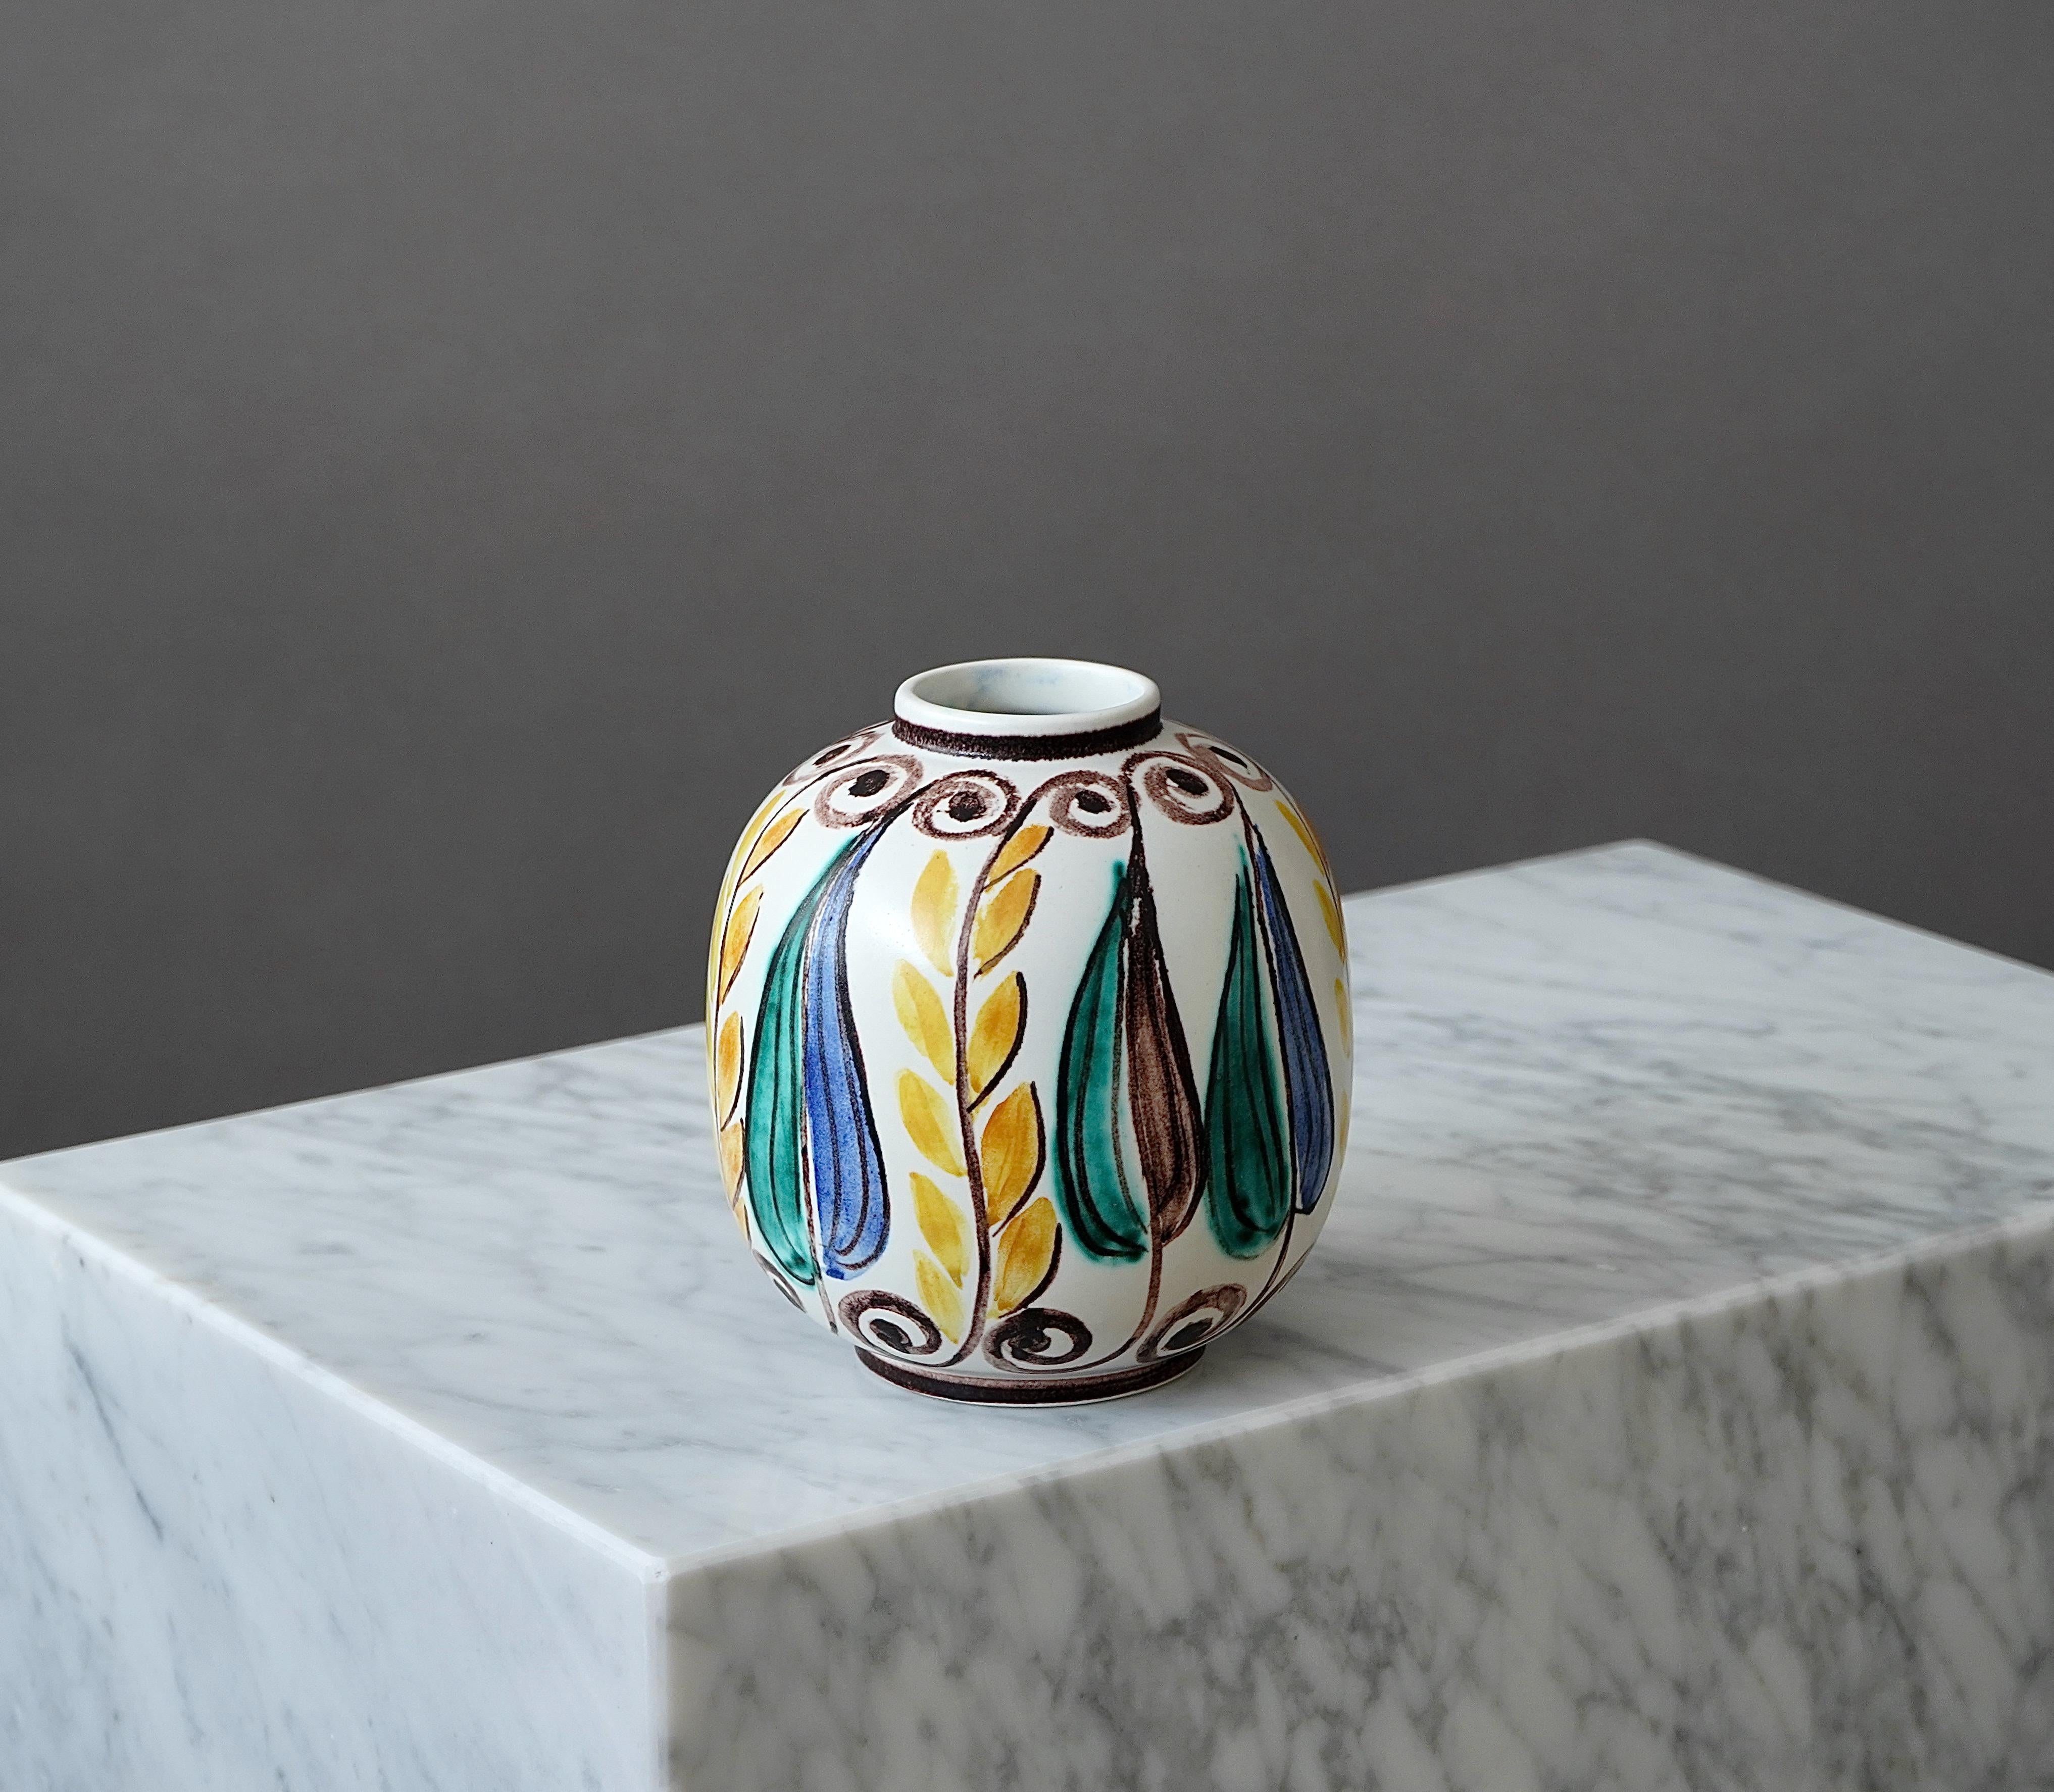 A beautiful stoneware vase with amazing glaze.
Made by Hertha Bengtson for Rörstrand, Sweden, 1950s.

Excellent condition.
Signed 'Bengtson' and 'R' för Rörstrand.

Hertha Bengtson (1917-1993) is one of the well-known representatives of the